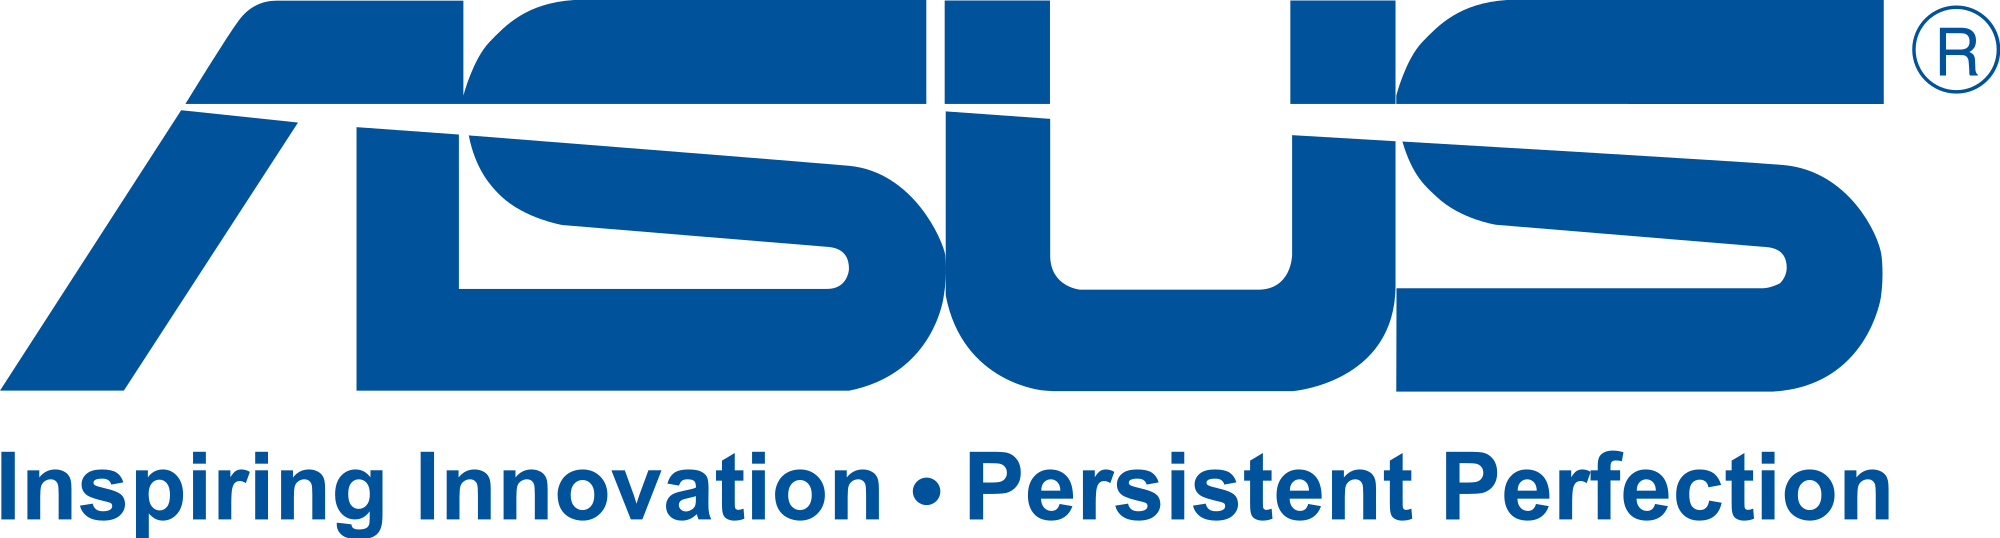 Asus Logo Inspiring Innovation Persistent Perfection PNG